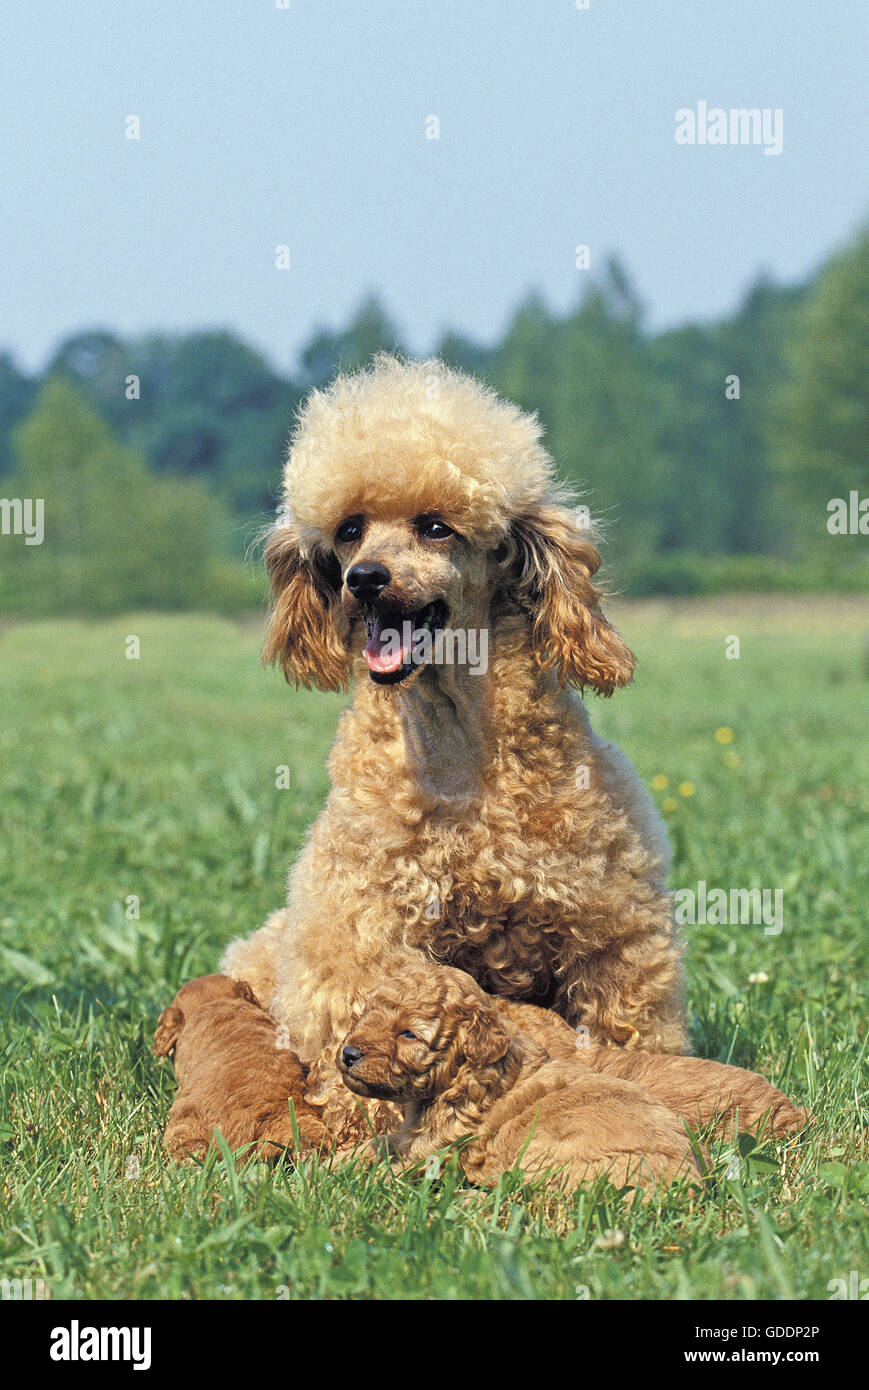 Apricot Miniature Poodle, Mother and Pups on Grass Stock Photo